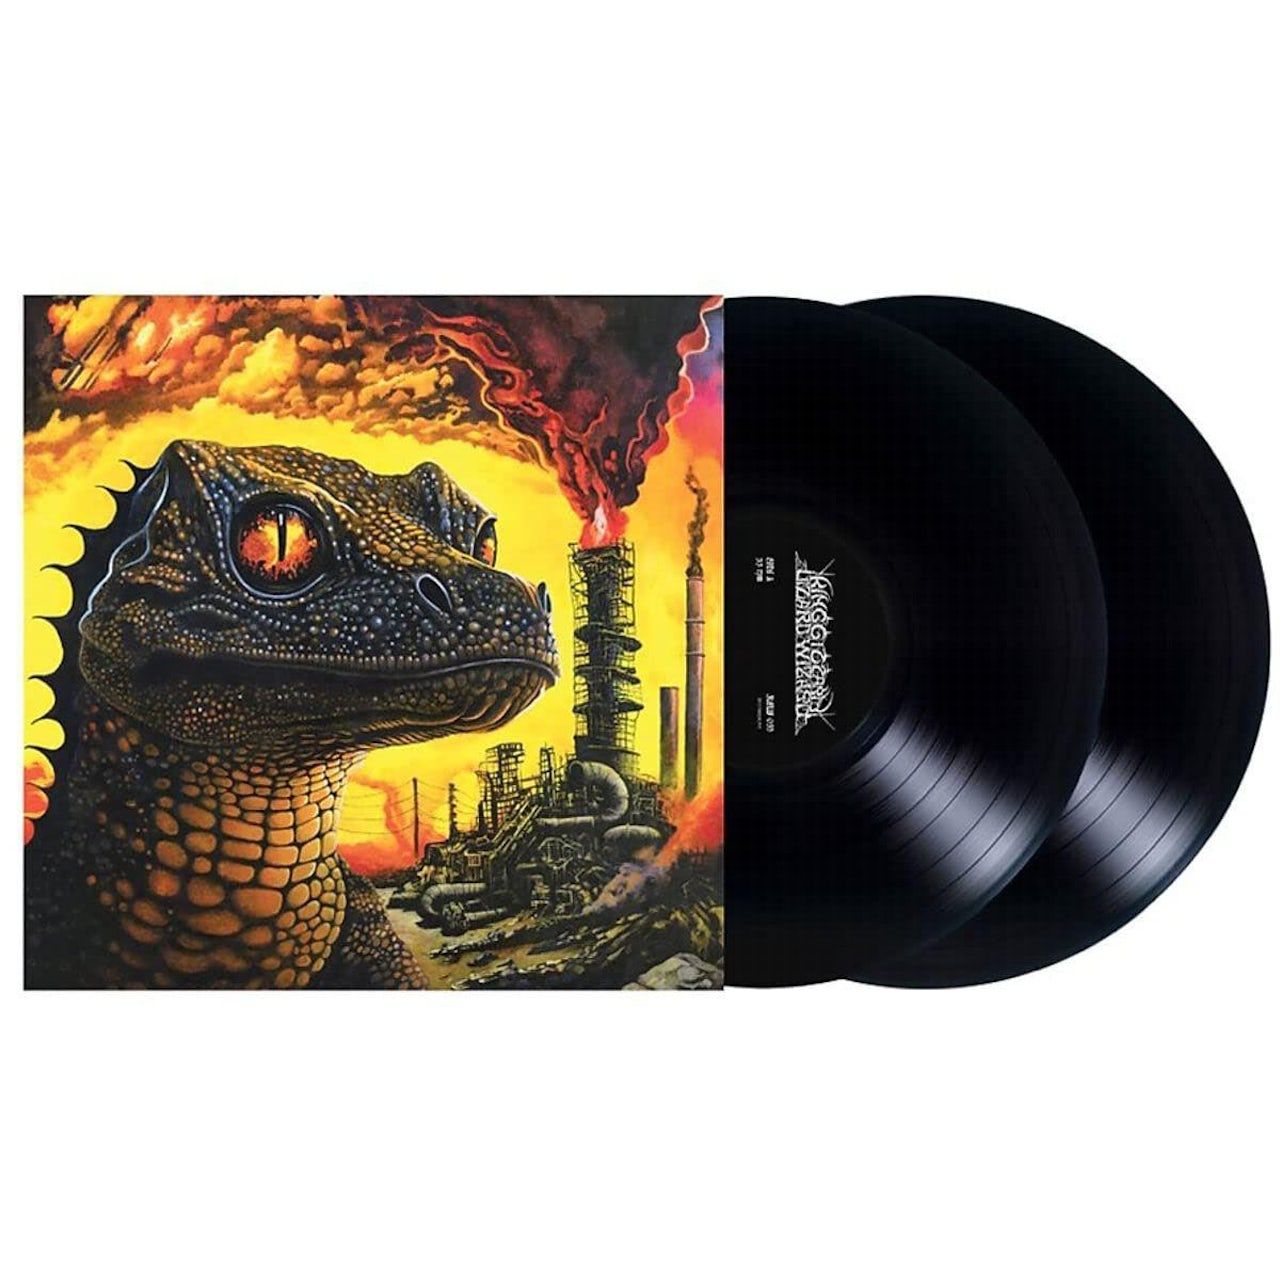 0842812189524, Виниловая пластинка King Gizzard & The Lizard Wizard, Petrodragonic Apocalypse; Or, Dawn Of Eternal Night: An Annihilation Of Planet Earth And The Beginning Of Merciless Damnation (coloured) виниловая пластинка king gizzard and the lizard wizard – changes lp